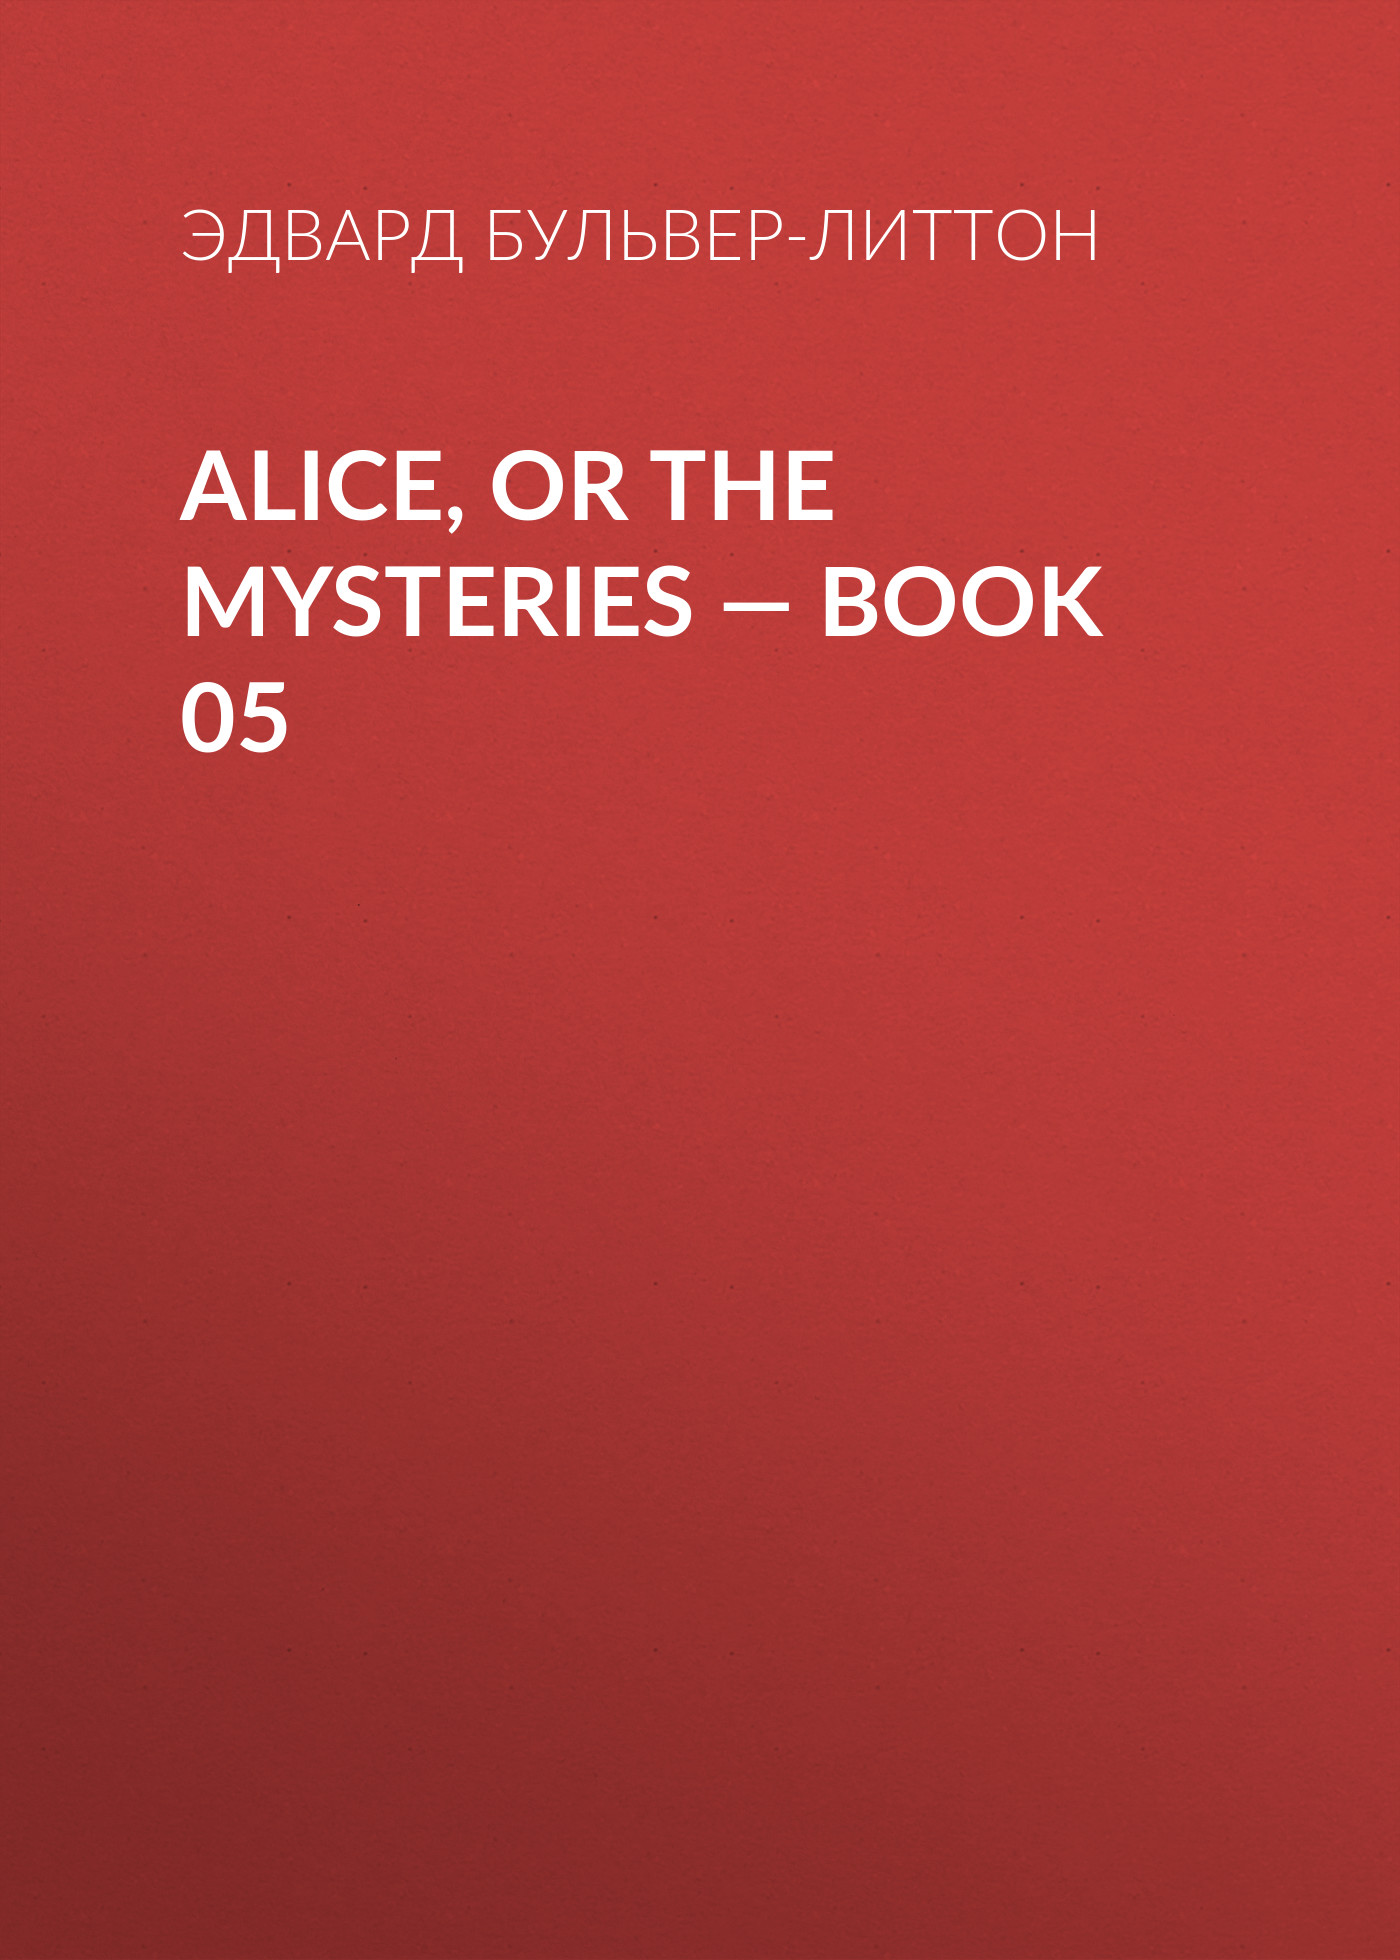 Alice, or the Mysteries— Book 05